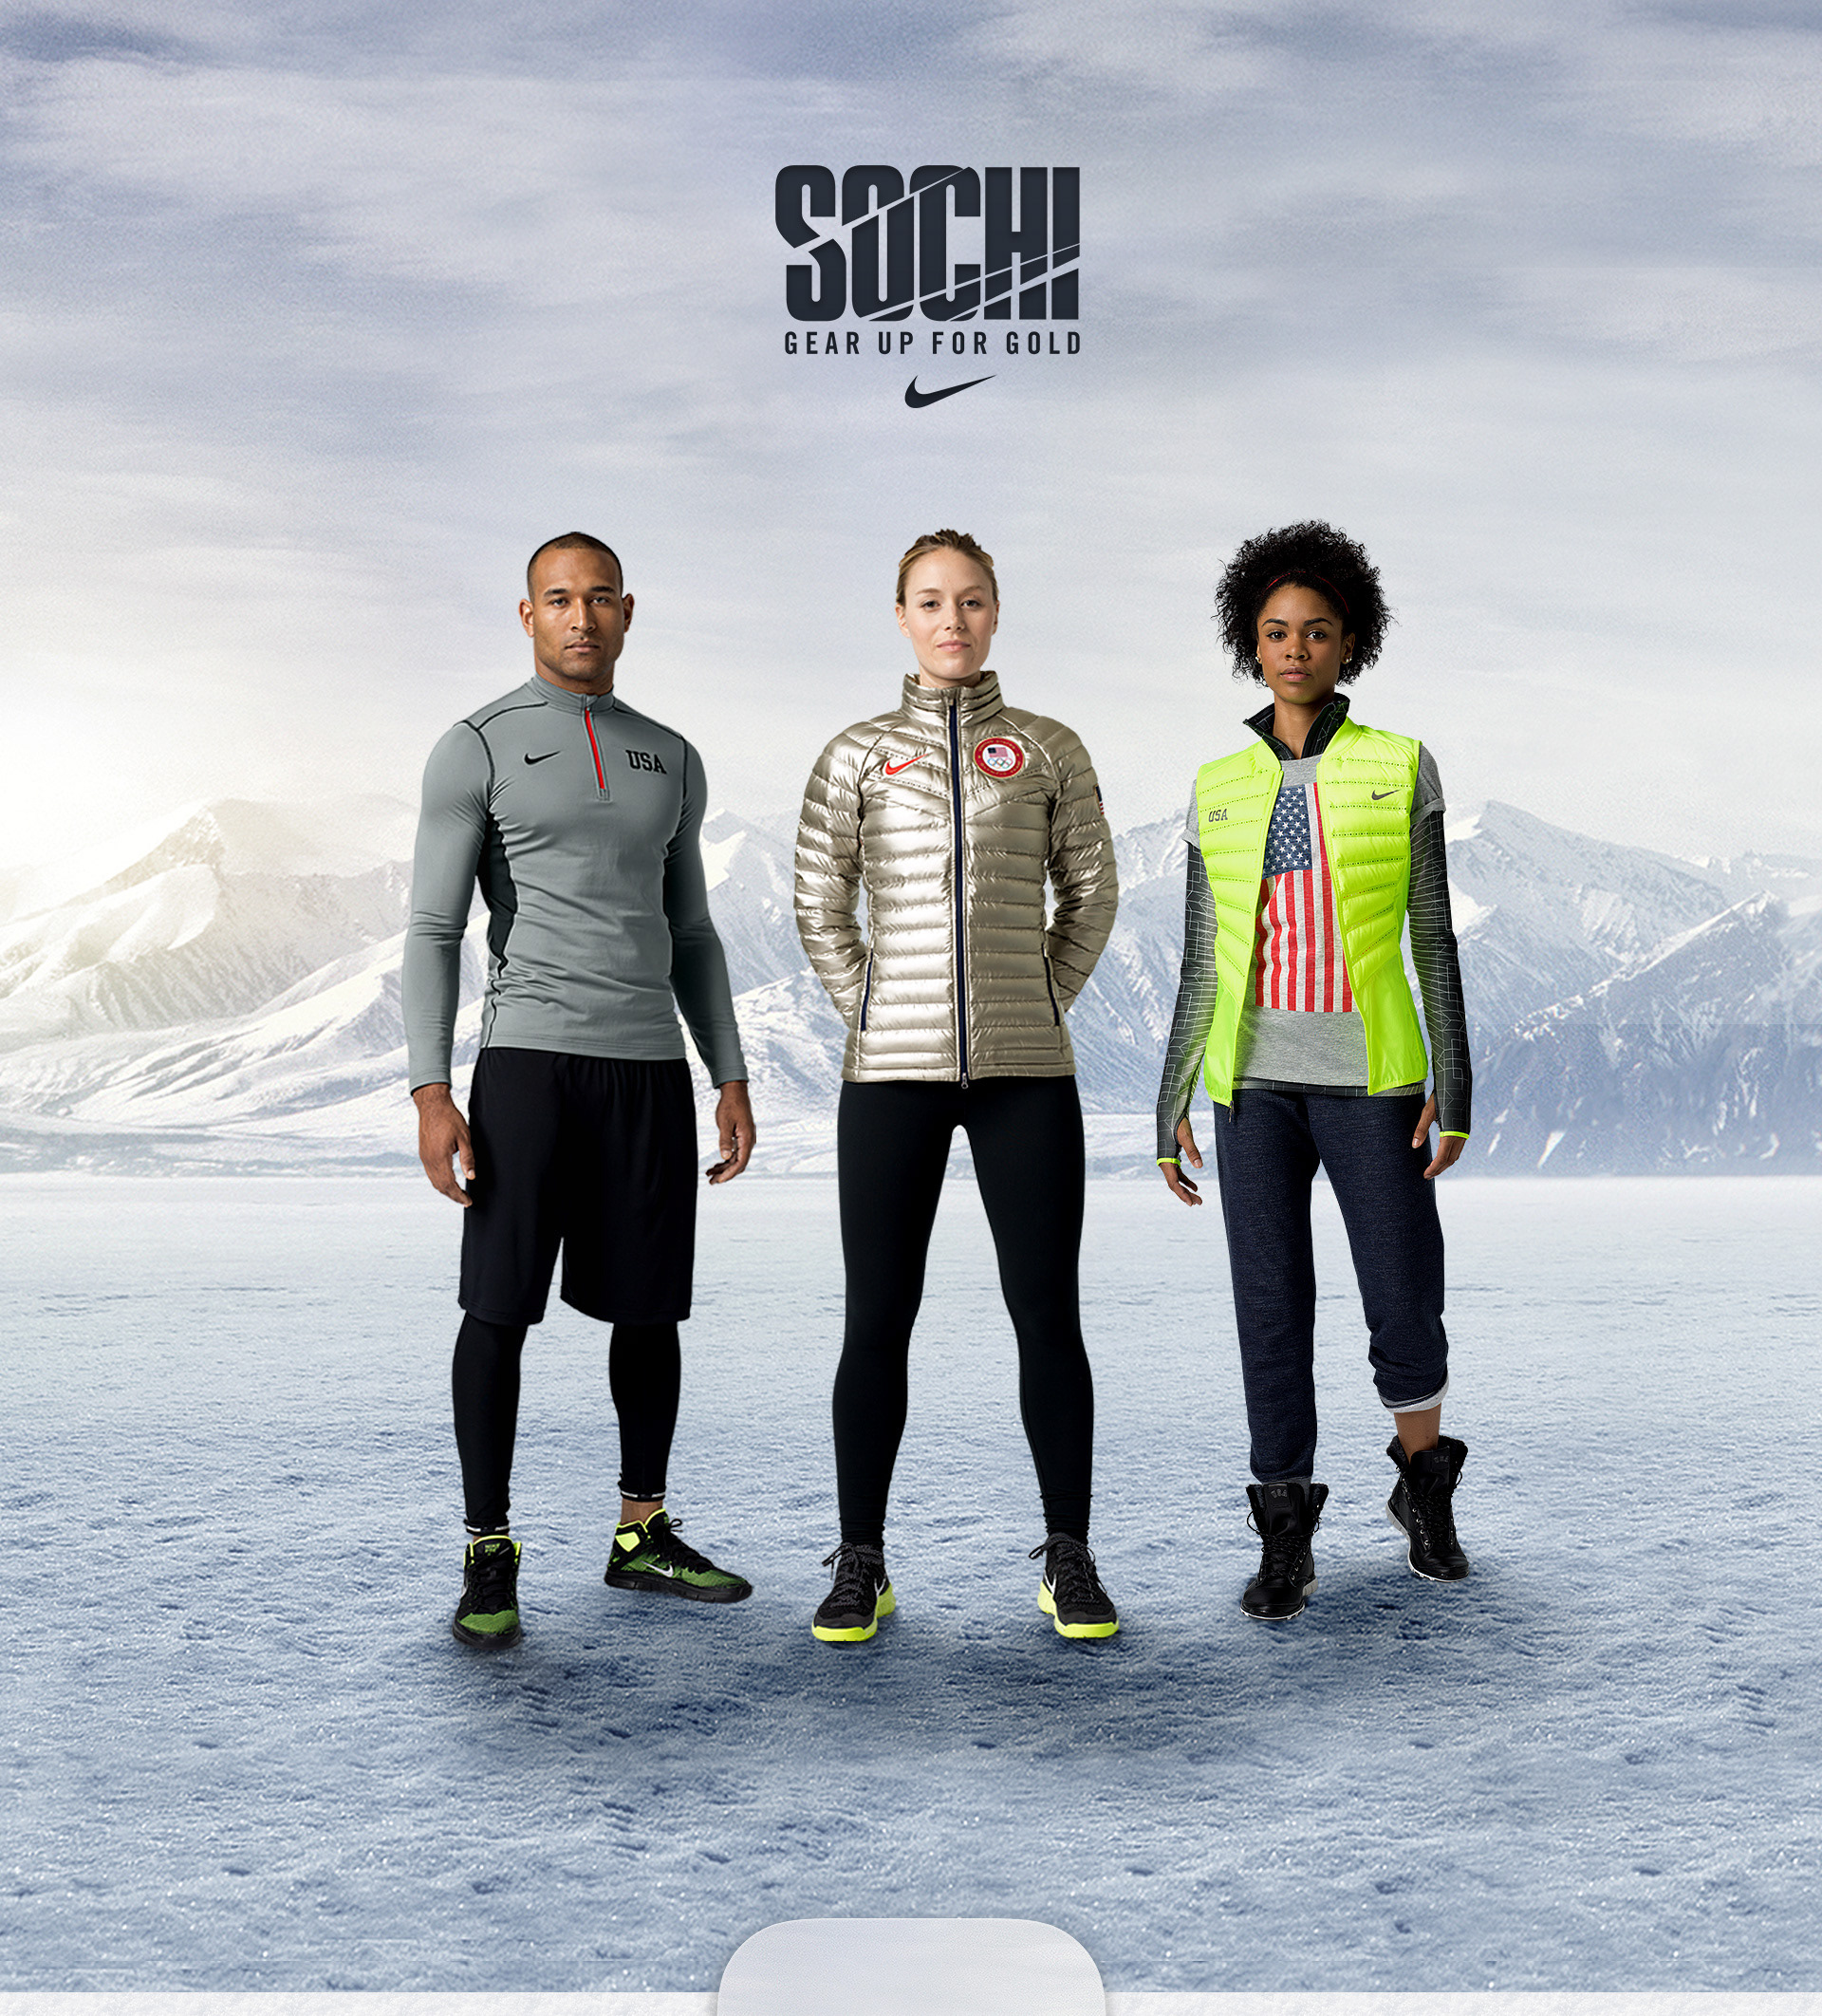 Nike Sochi - Gear Up For Gold